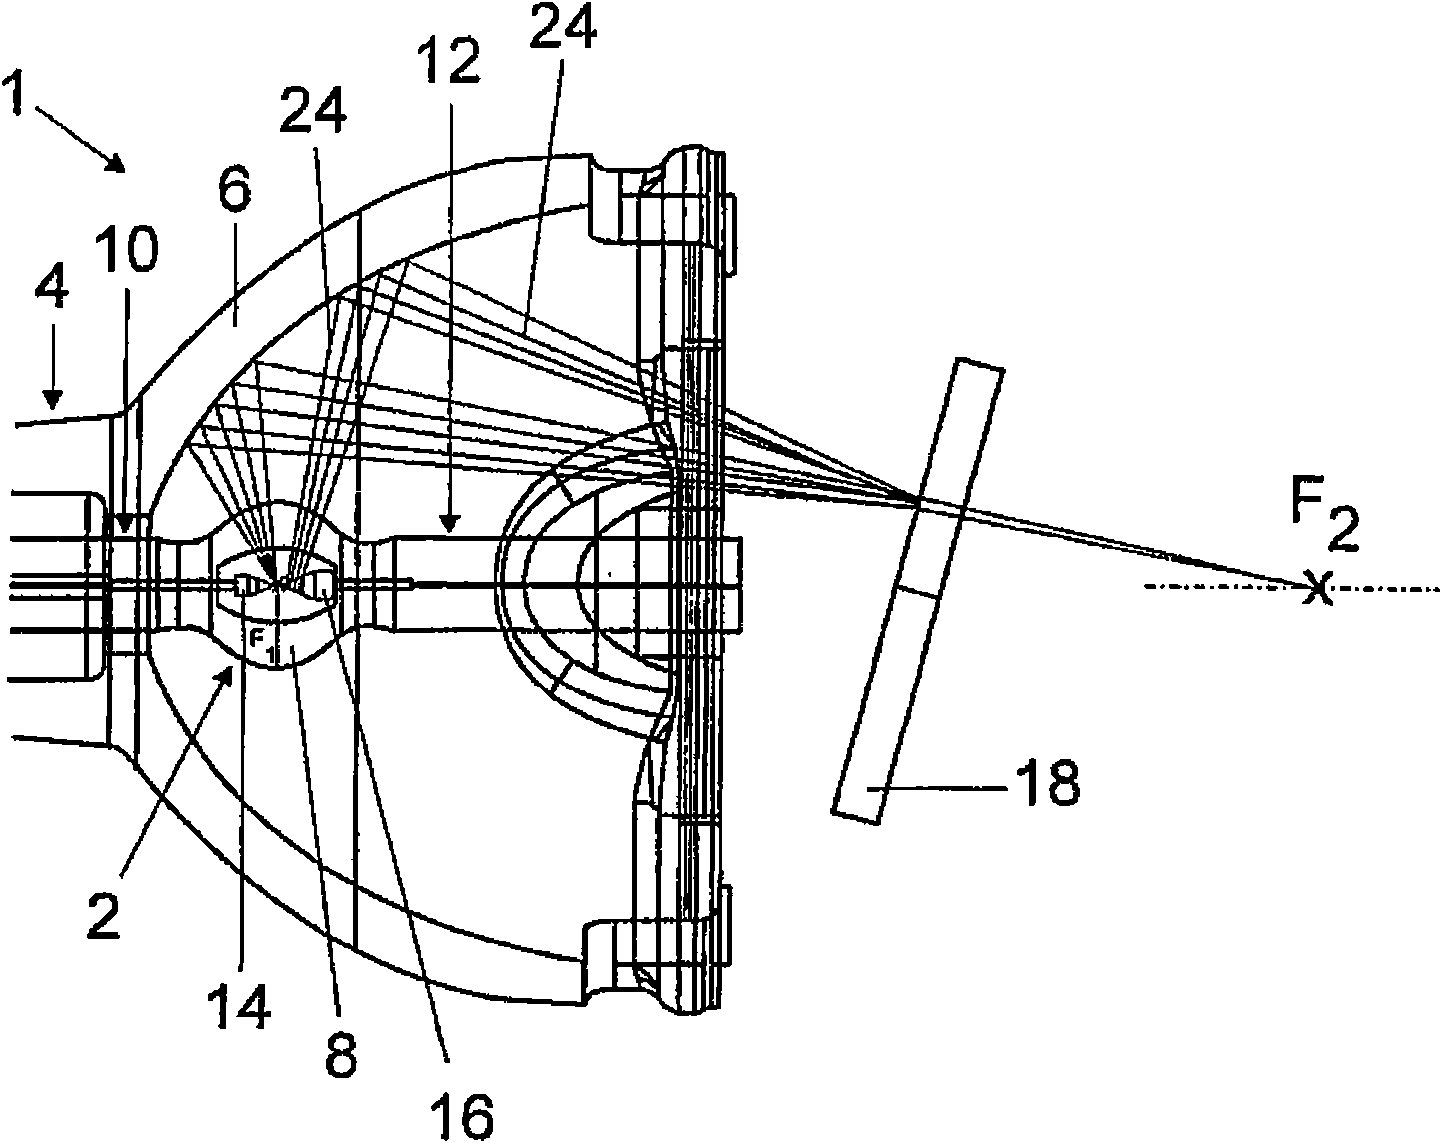 Lamp module with alternating current burner for projectors